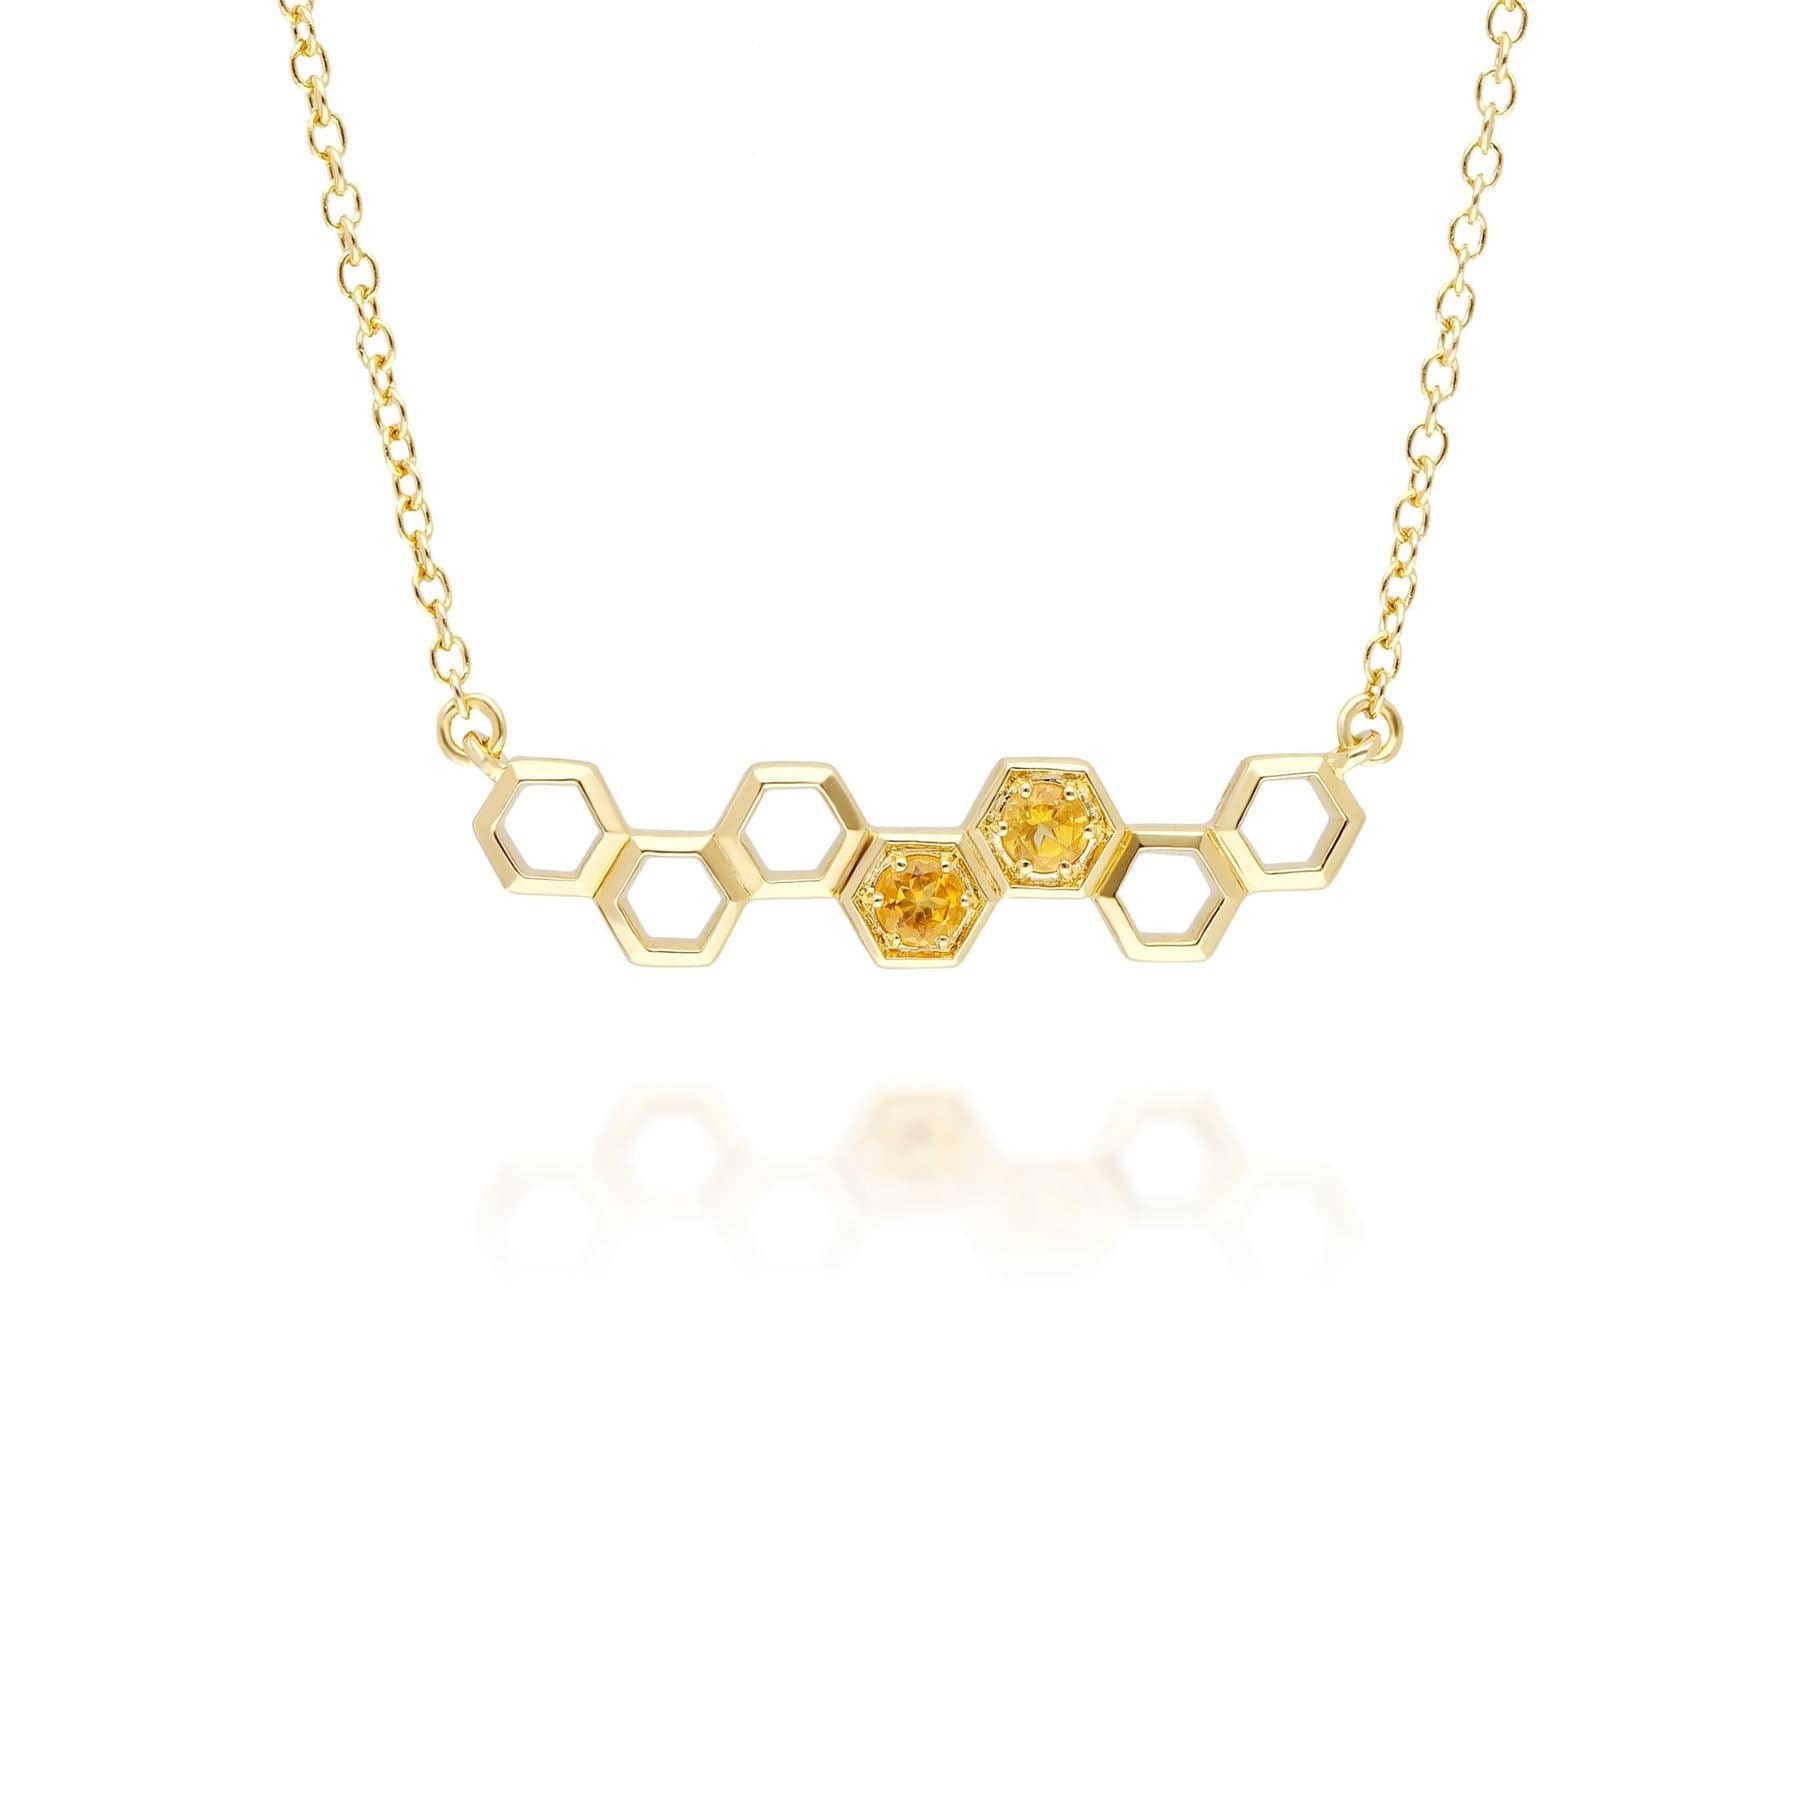 Honeycomb Inspired Citrine Link Necklace in 9ct Yellow Gold - Gemondo